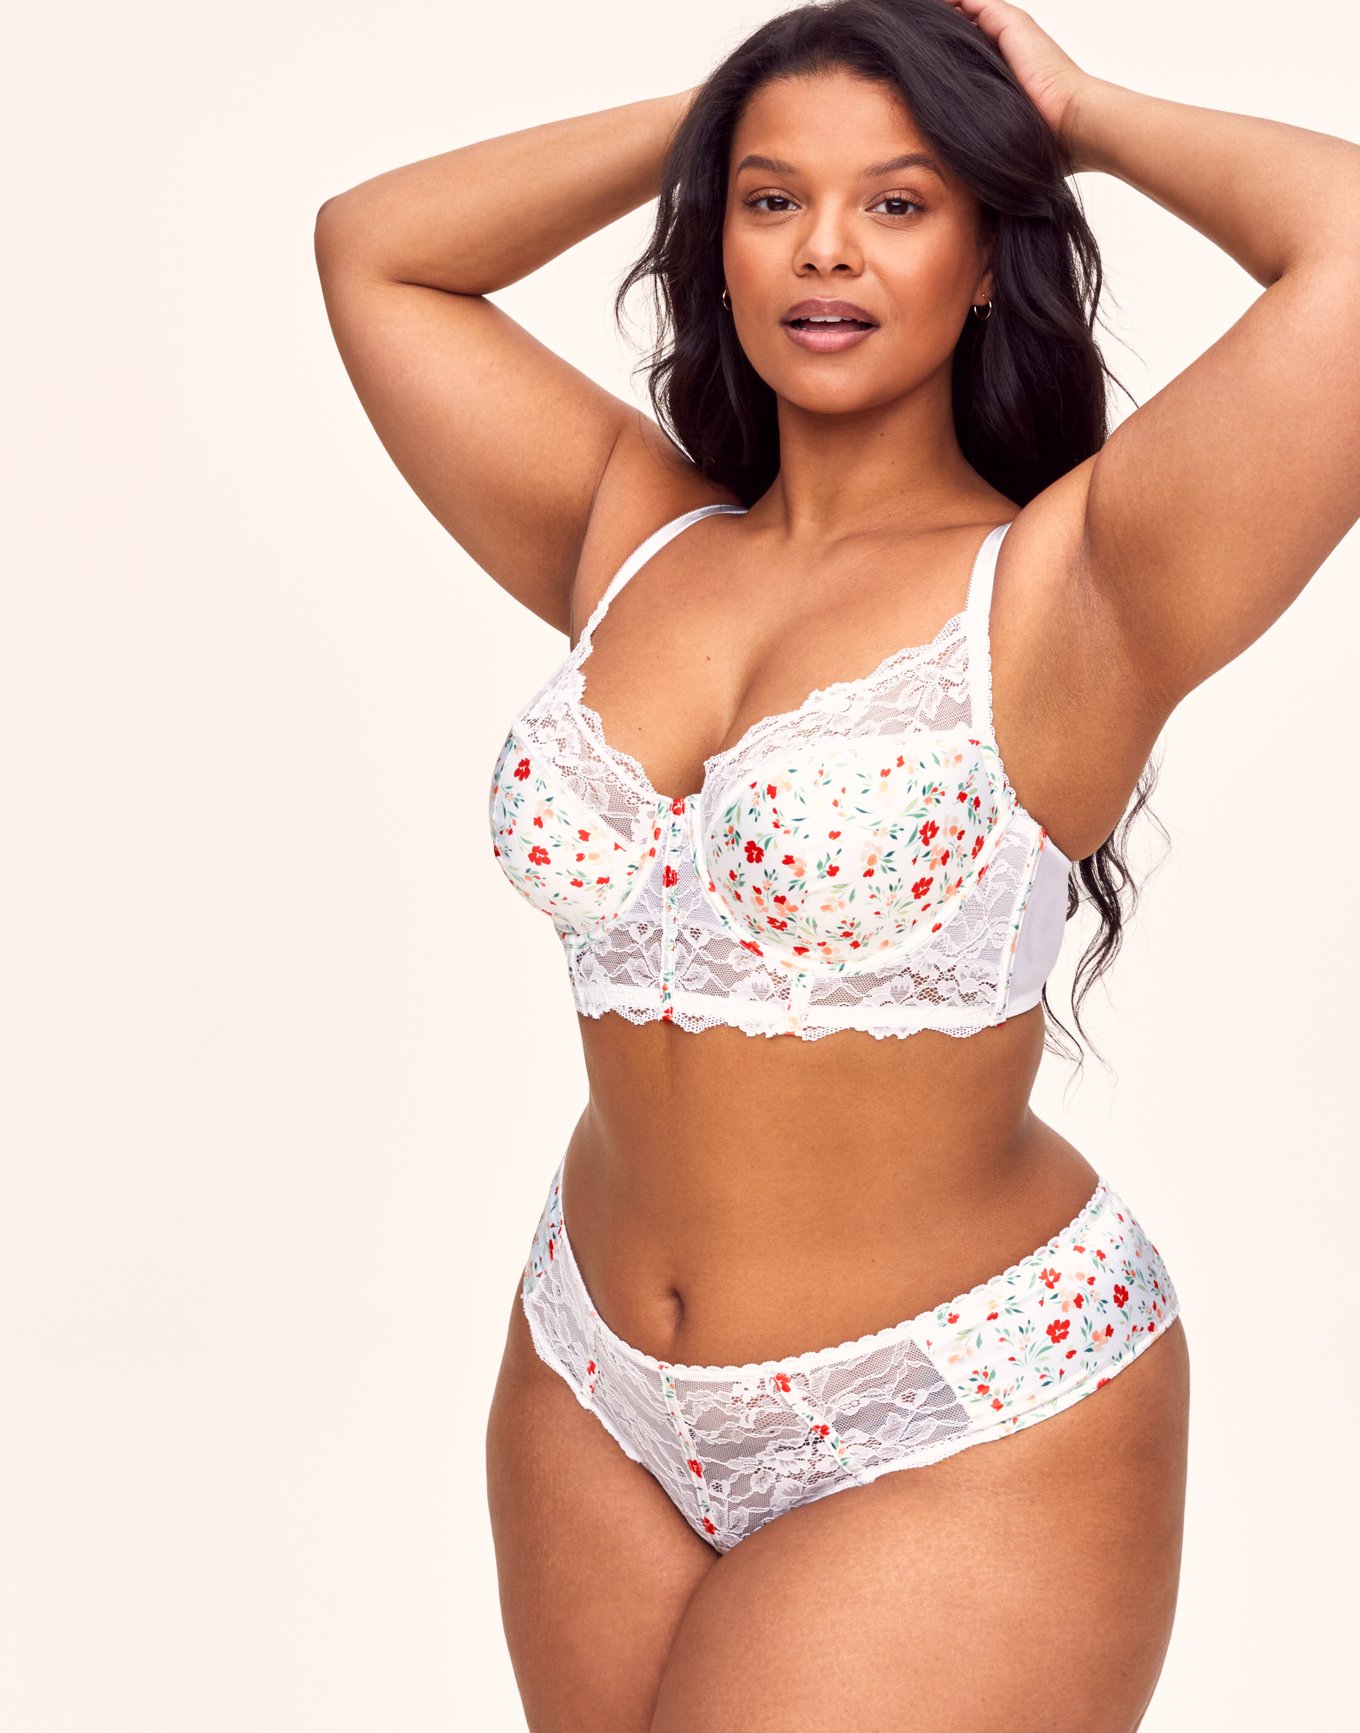 Lingerie Bras Bra For Woman White Floral Print Lace 3-Piece Sexy